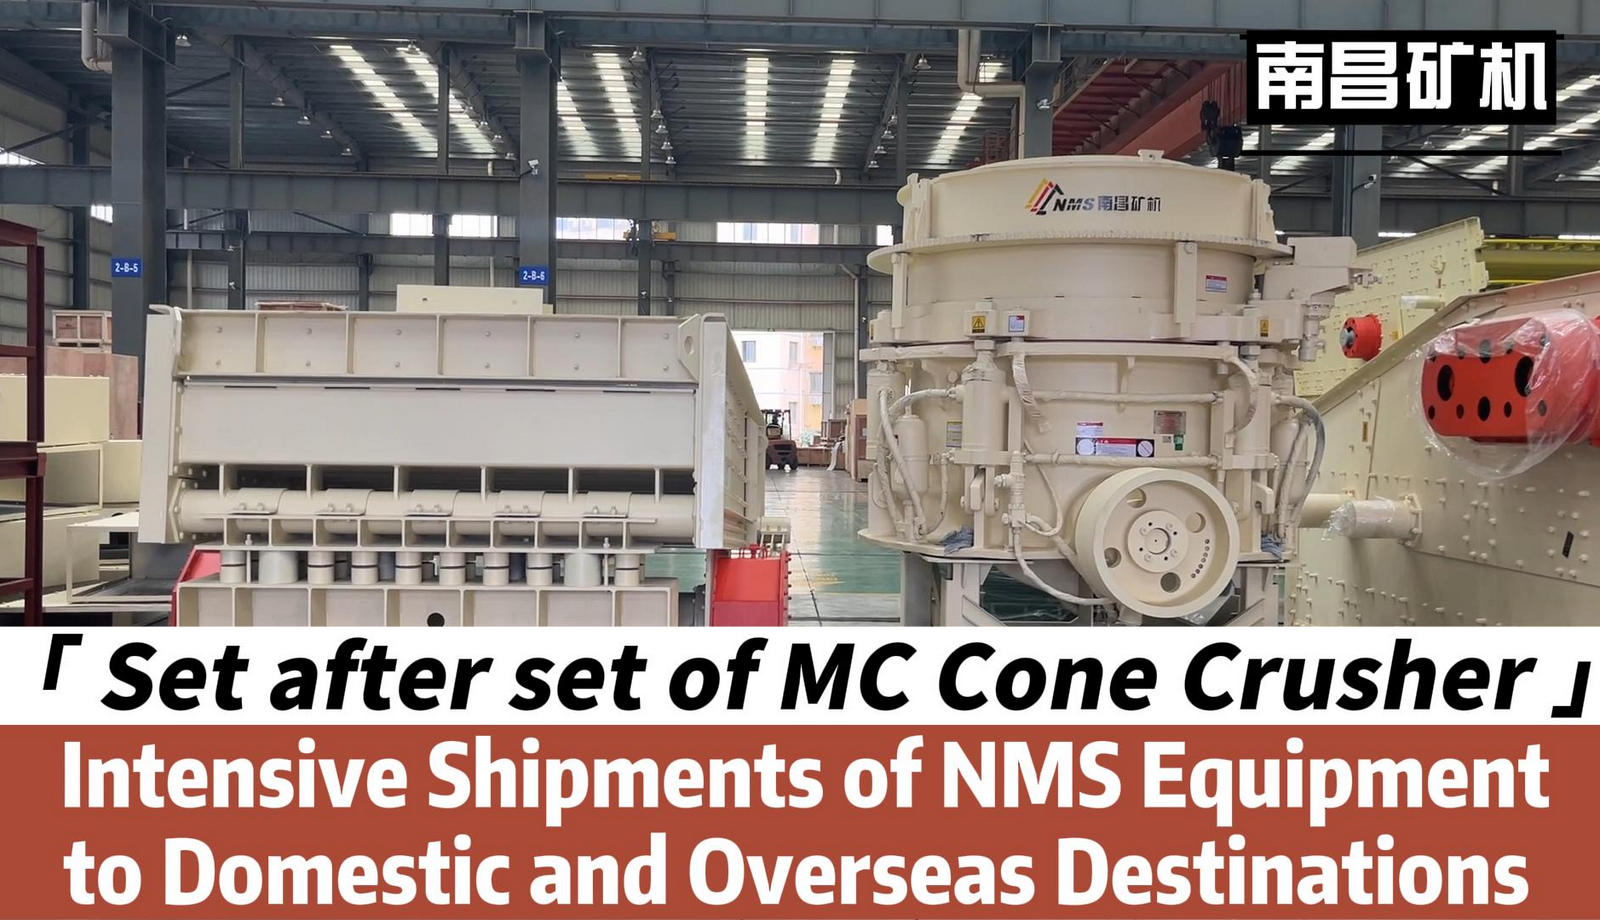 「Set after set of MC Cone Crusher」 Intensive Shipments of NMS Equipment to Domestic and Overseas Destinations